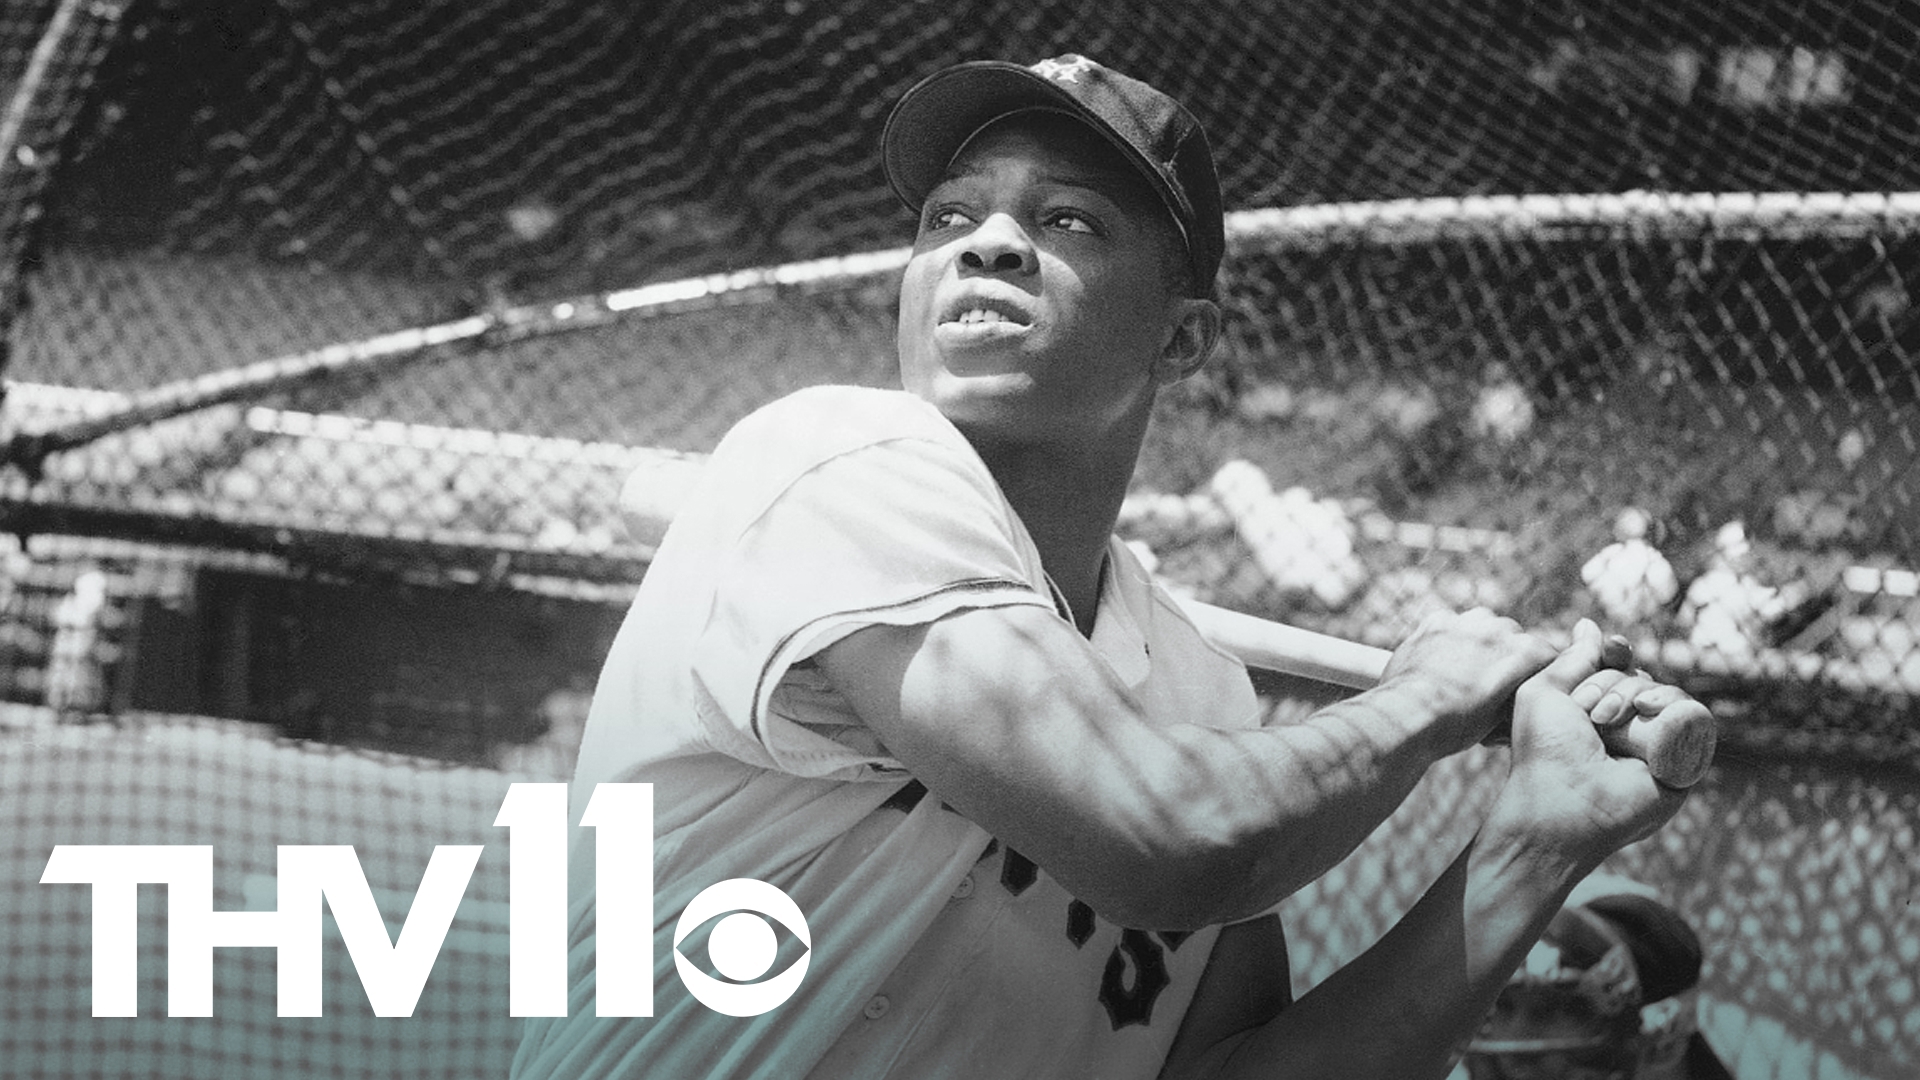 Willie Mays “passed away peacefully” at 93, surrounded by loved ones. He was a two-time MVP, 24-time All-Star and 12-time Gold Glove winner.